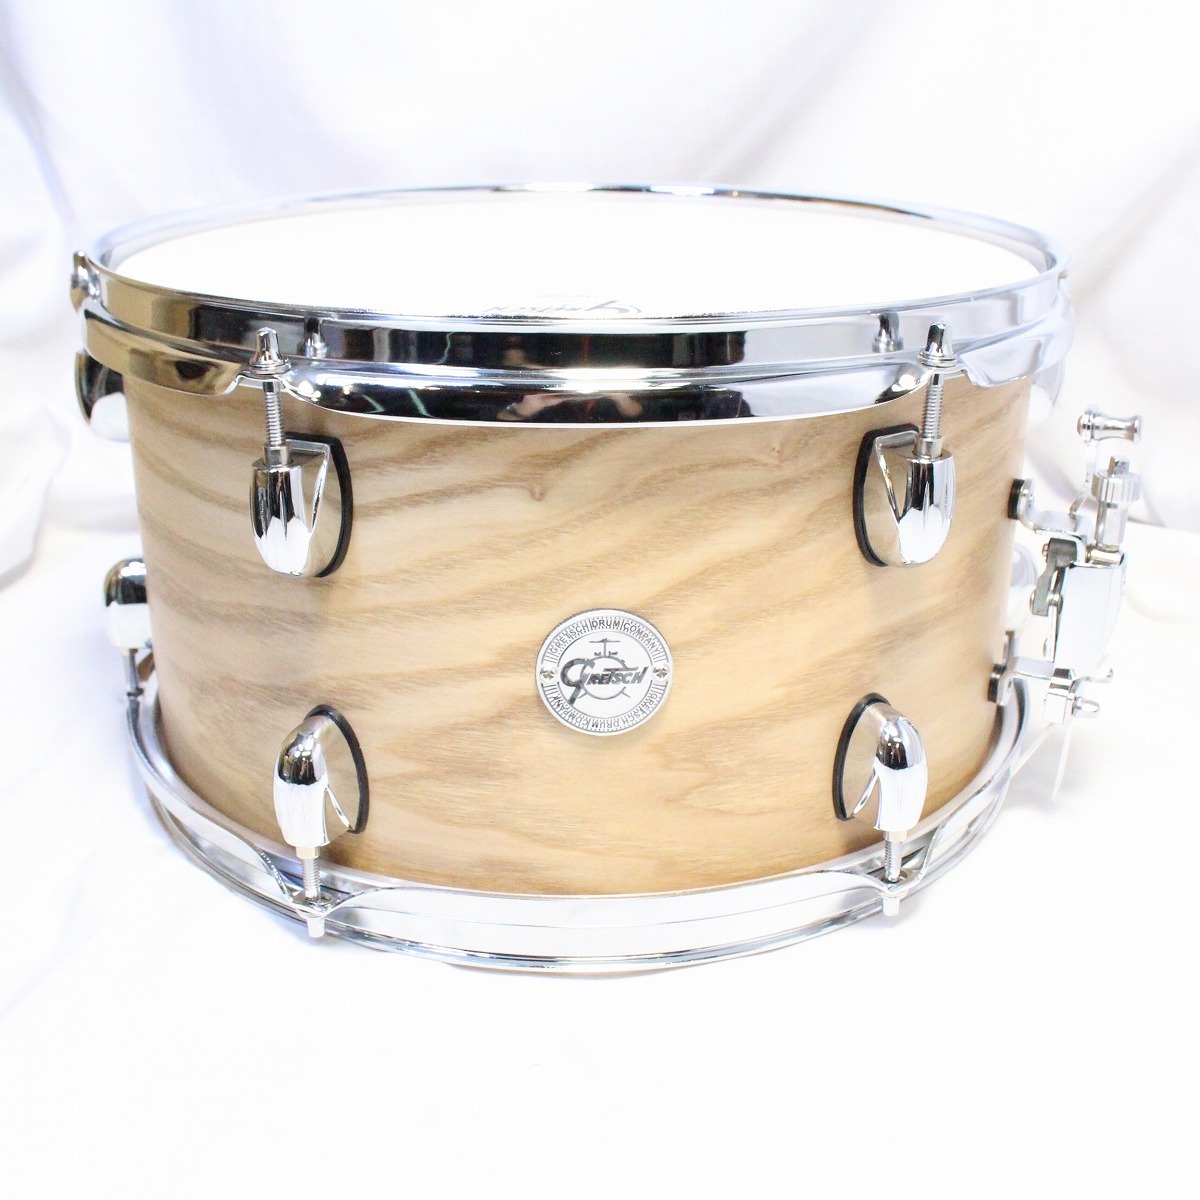 Gretsch S1-0713-ASHSN 13x7 Full Range Snare Drums Ash Snare ...